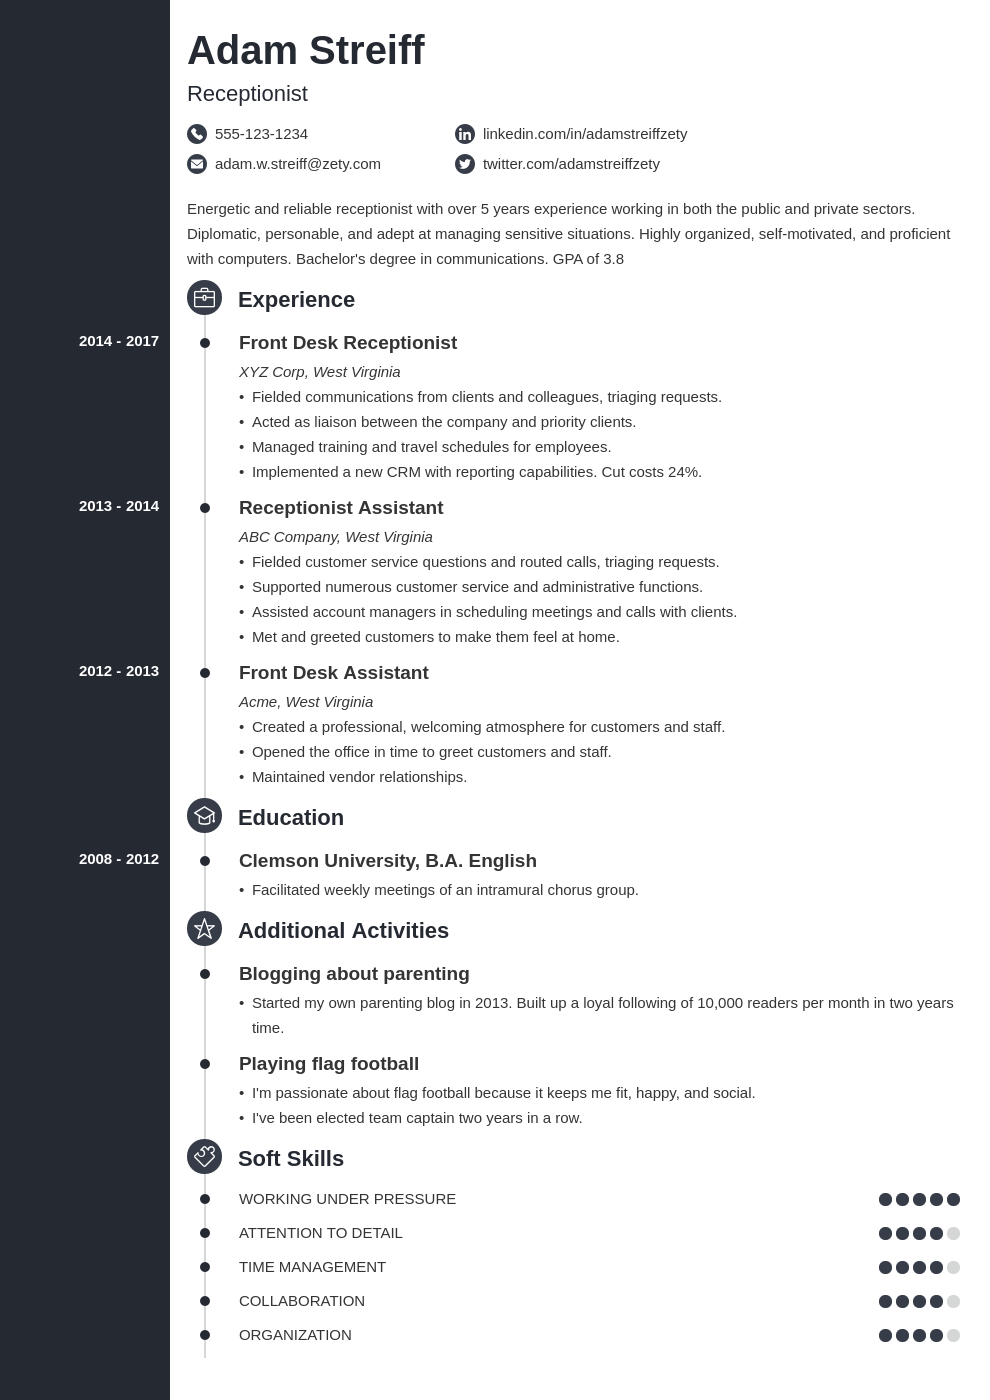 resume - How To Be More Productive?